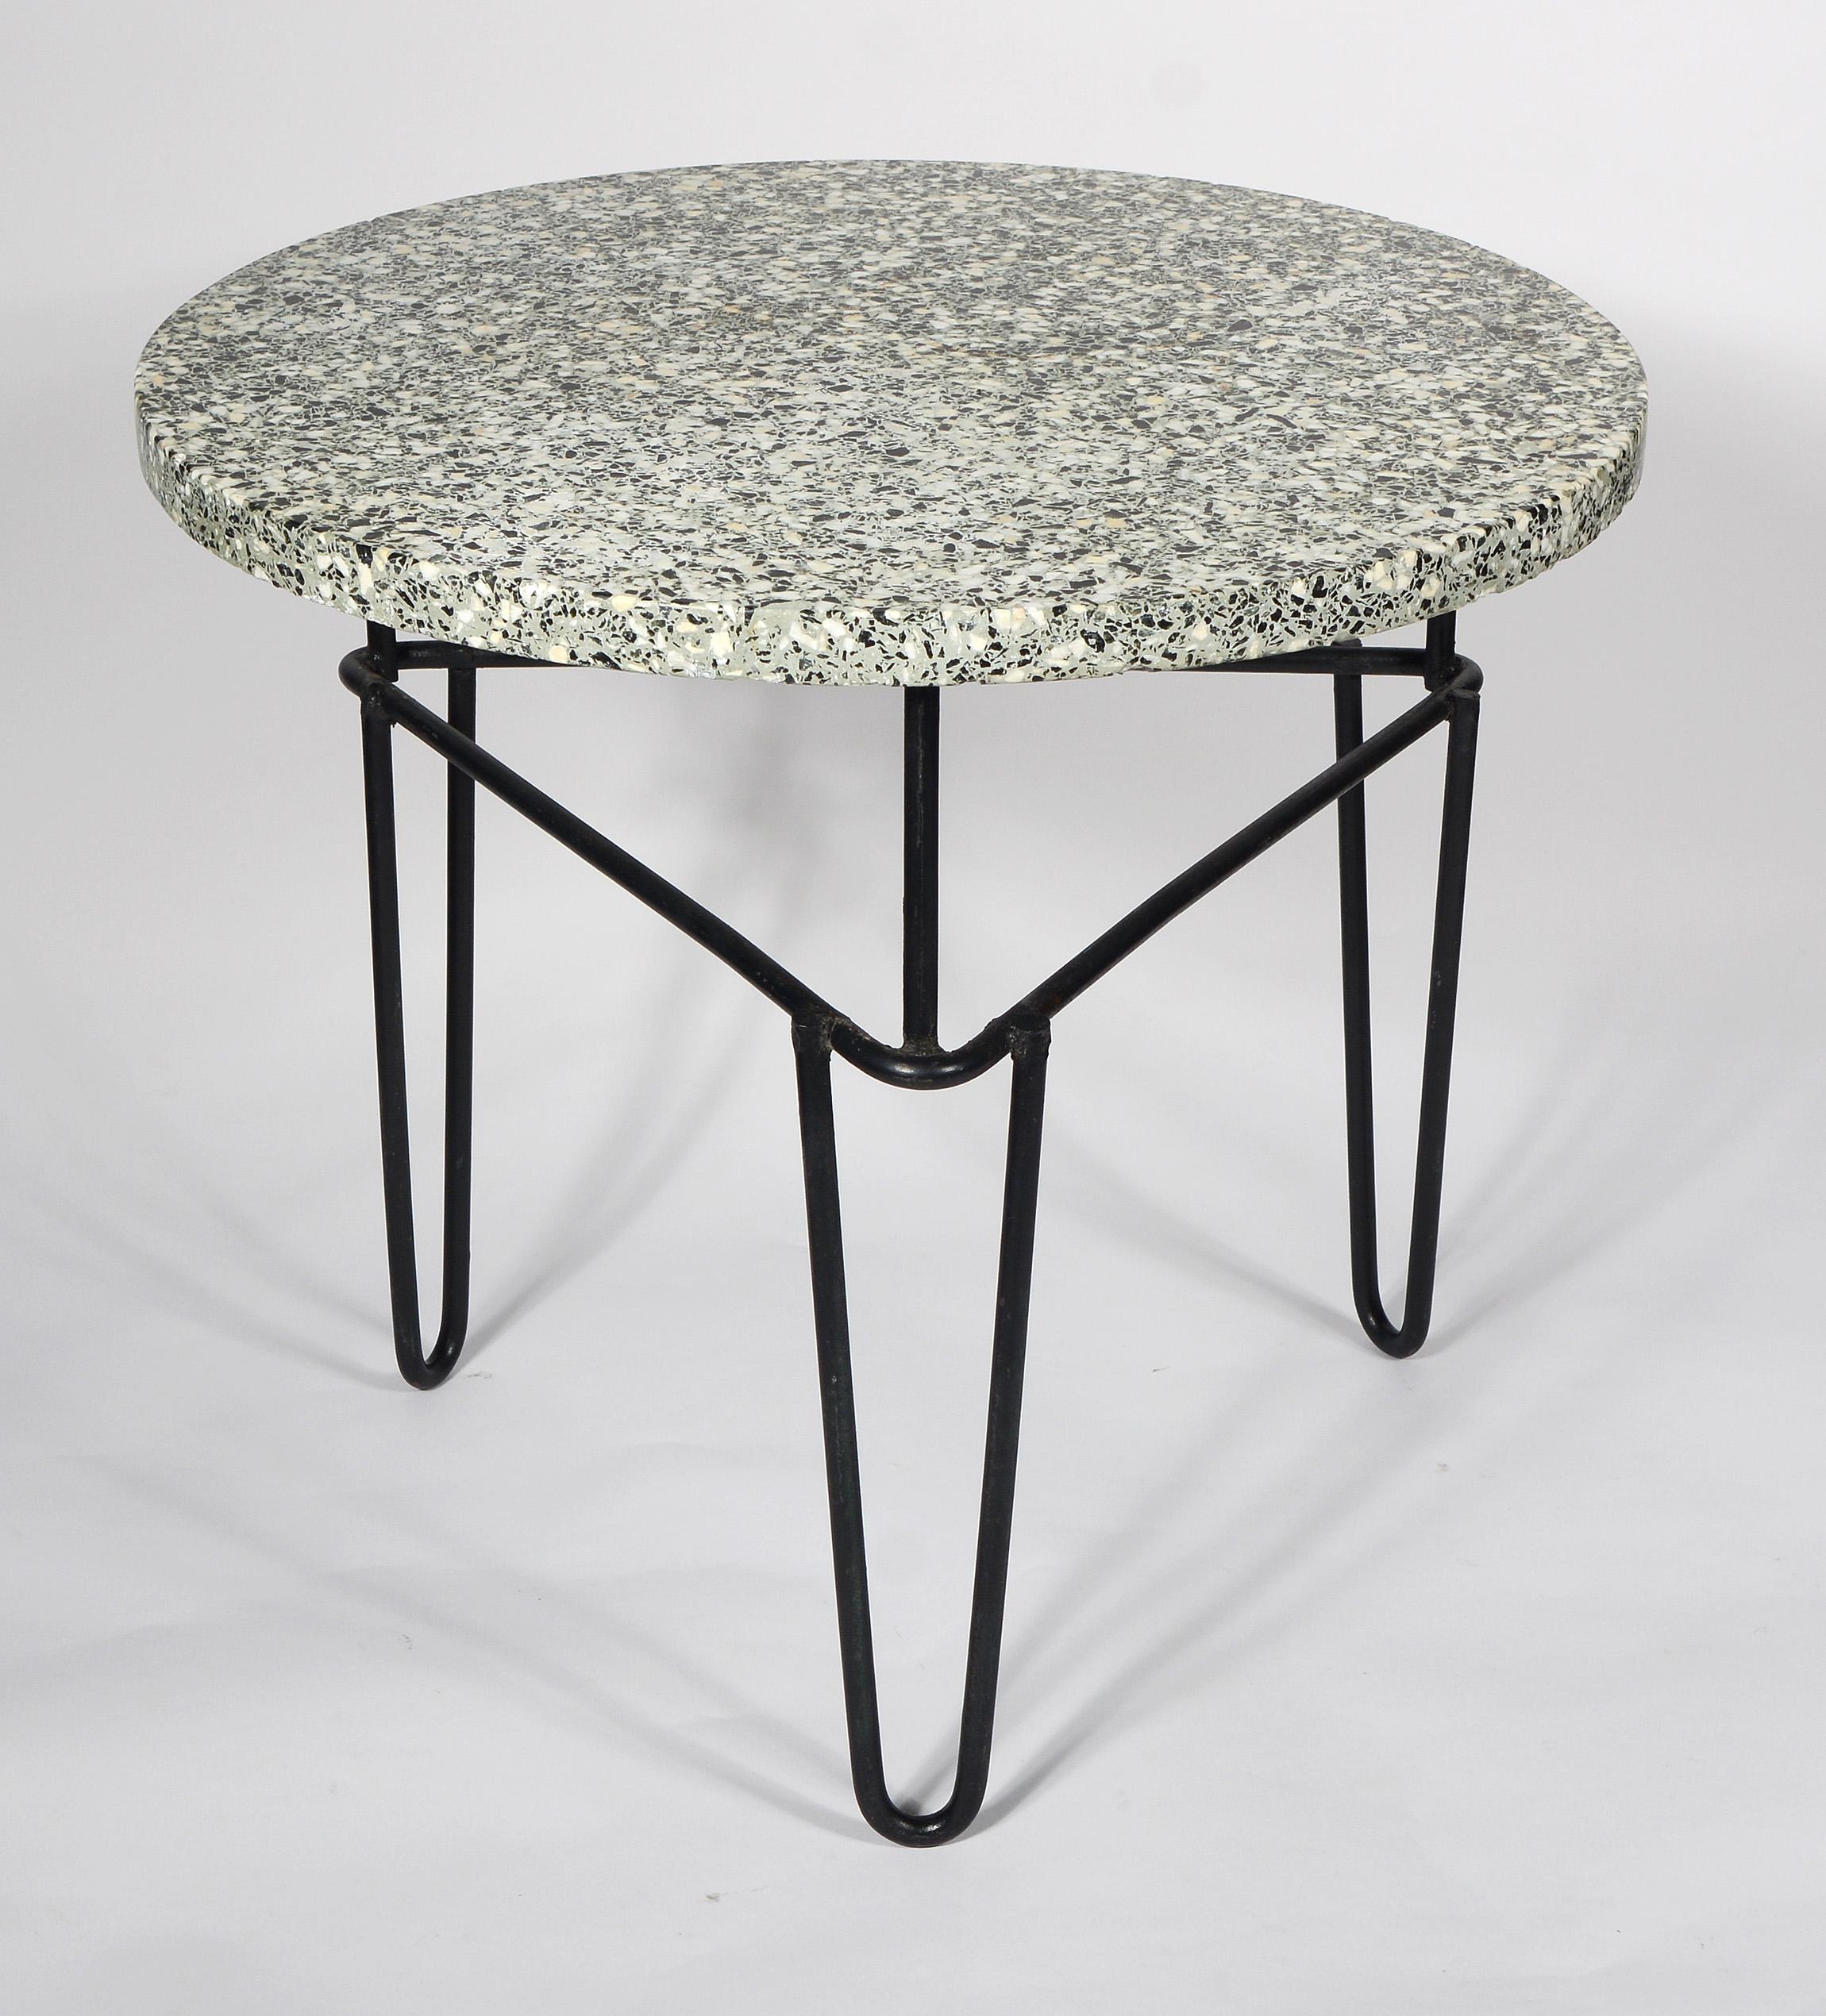 Wrought iron side table with a green terrazzo top. This has a triangular base with hairpin legs and three vertical supports for the top. The top is not attached and just rests on the base. There are some losses on the edge of the top. The majority